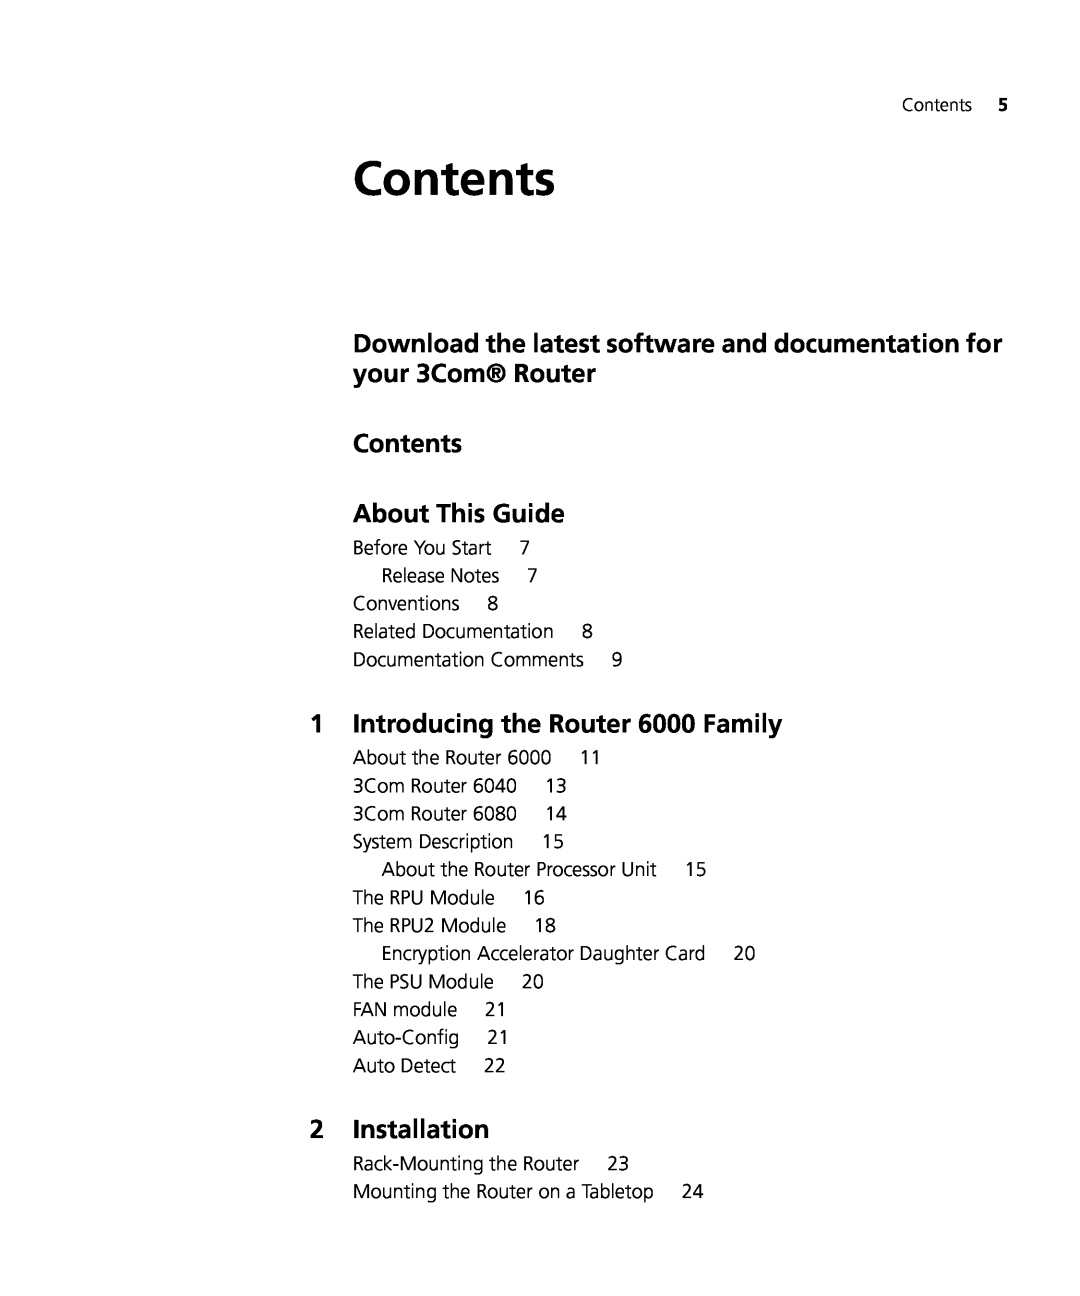 3Com manual Contents About This Guide, Introducing the Router 6000 Family, Installation 